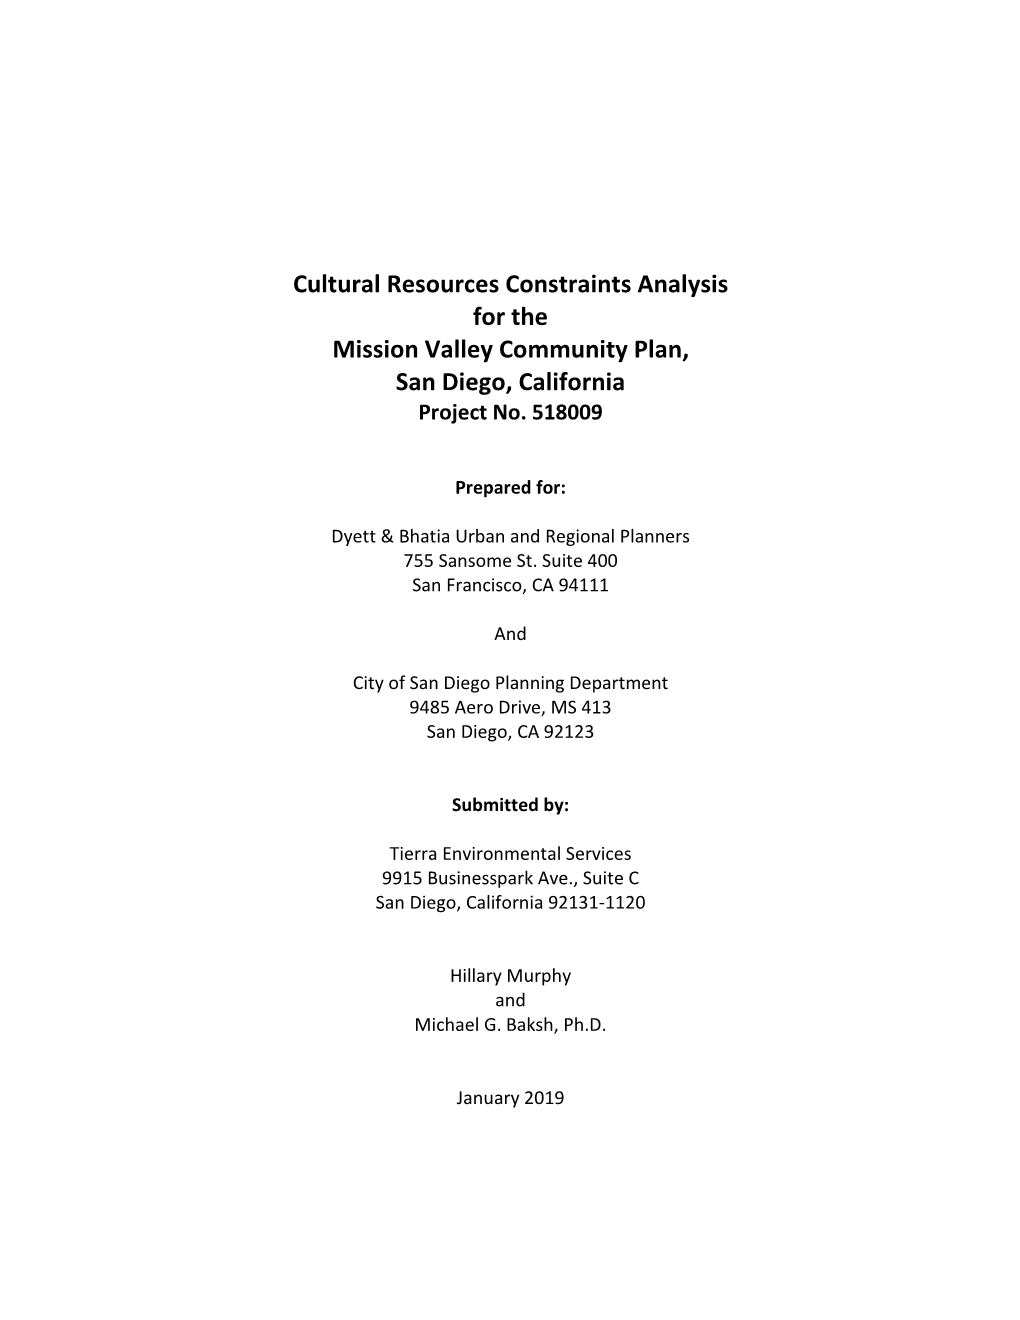 Cultural Resources Constraints Analysis for the Mission Valley Community Plan, San Diego, California Project No